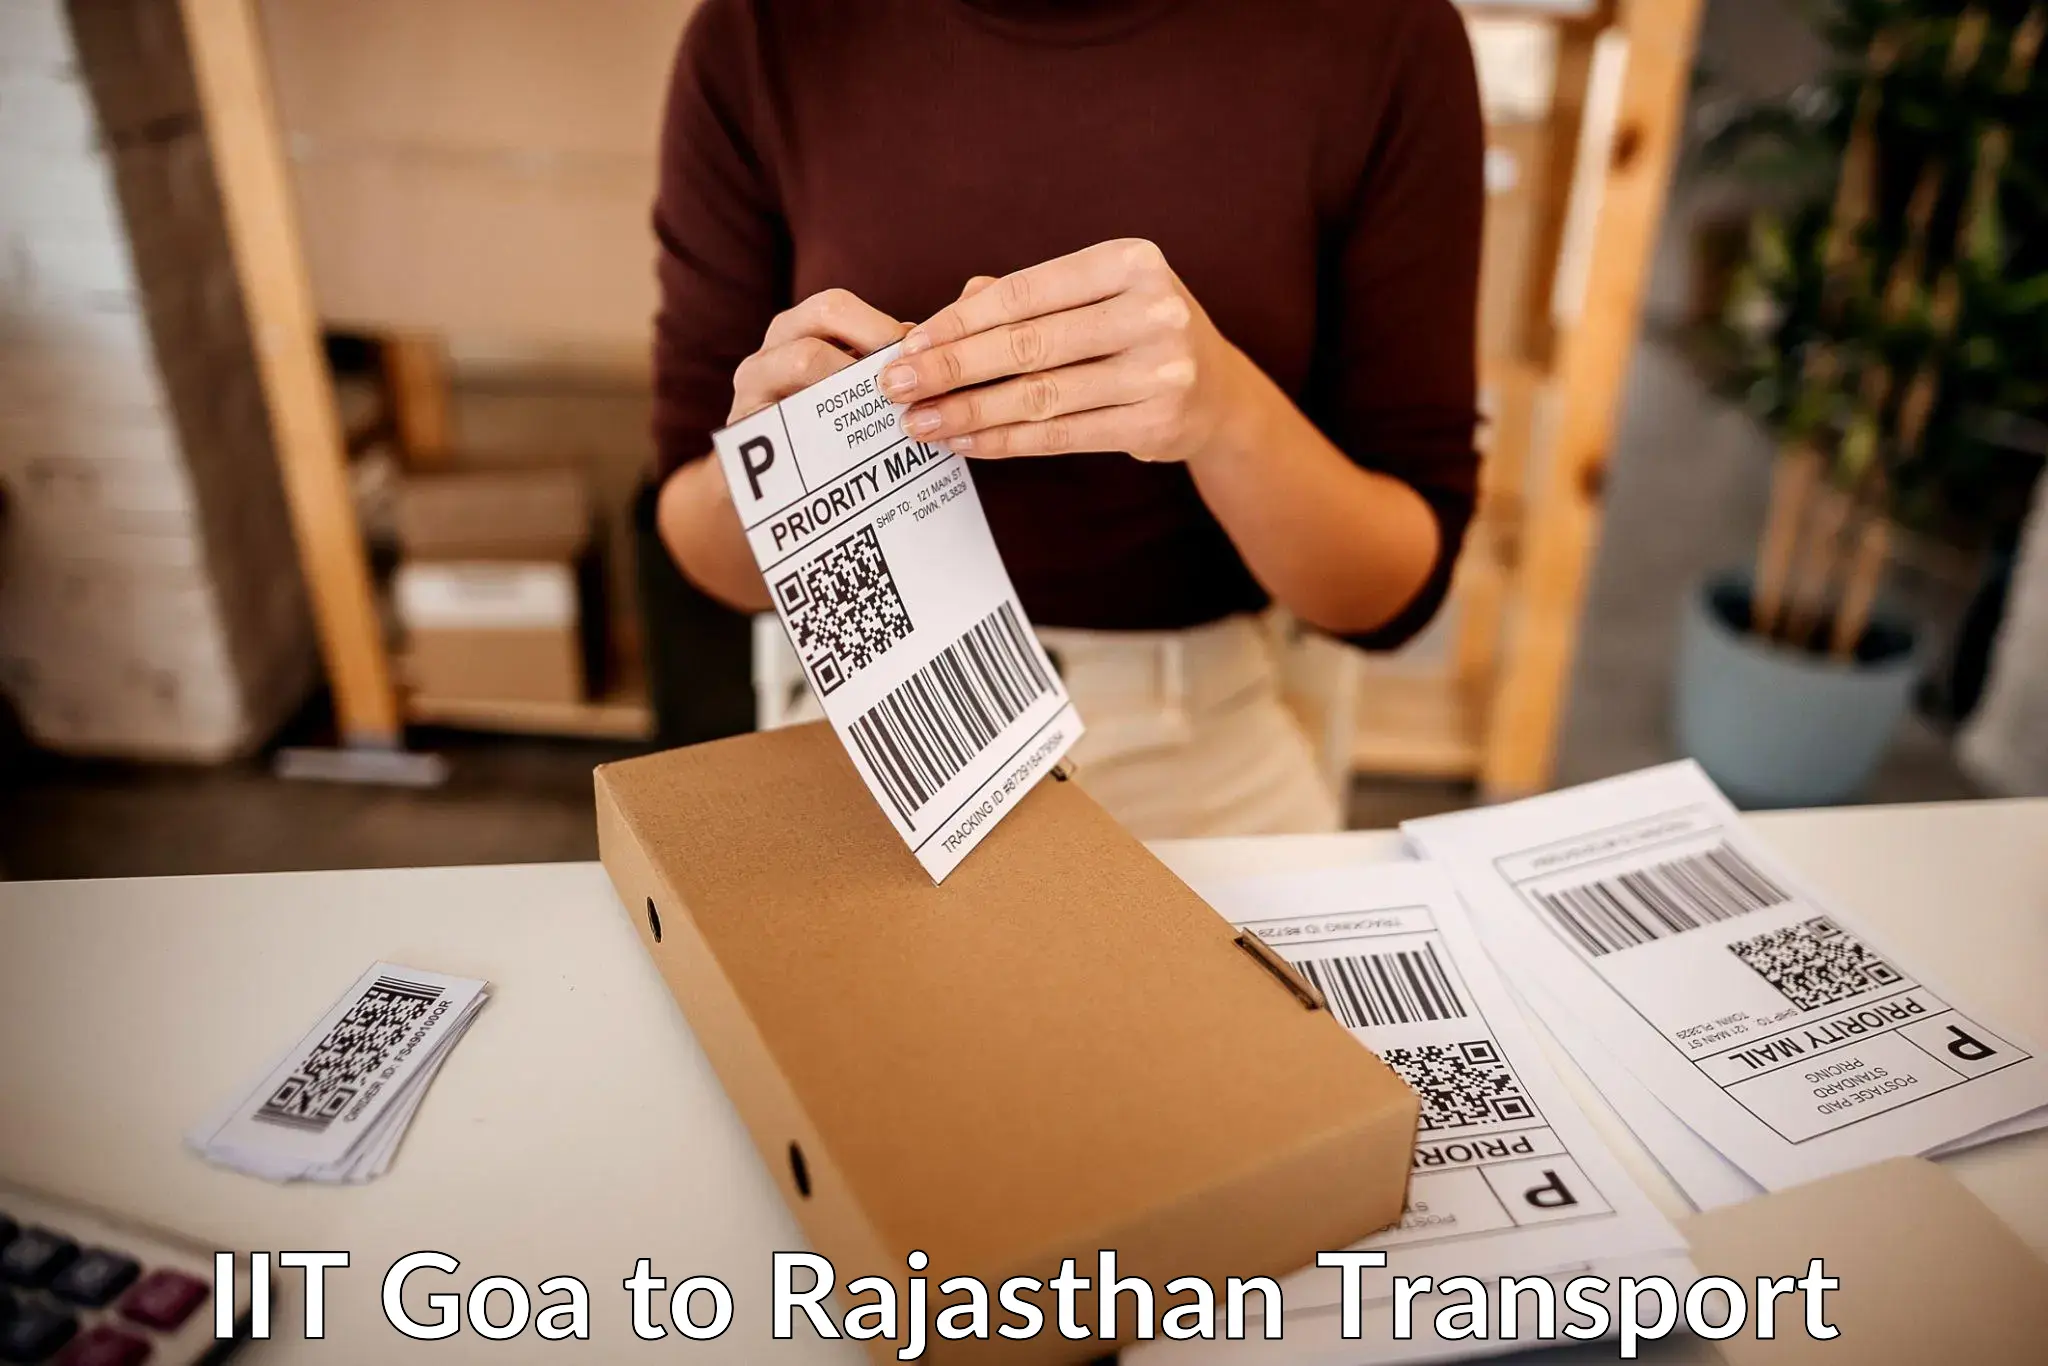 Container transport service IIT Goa to Nokha